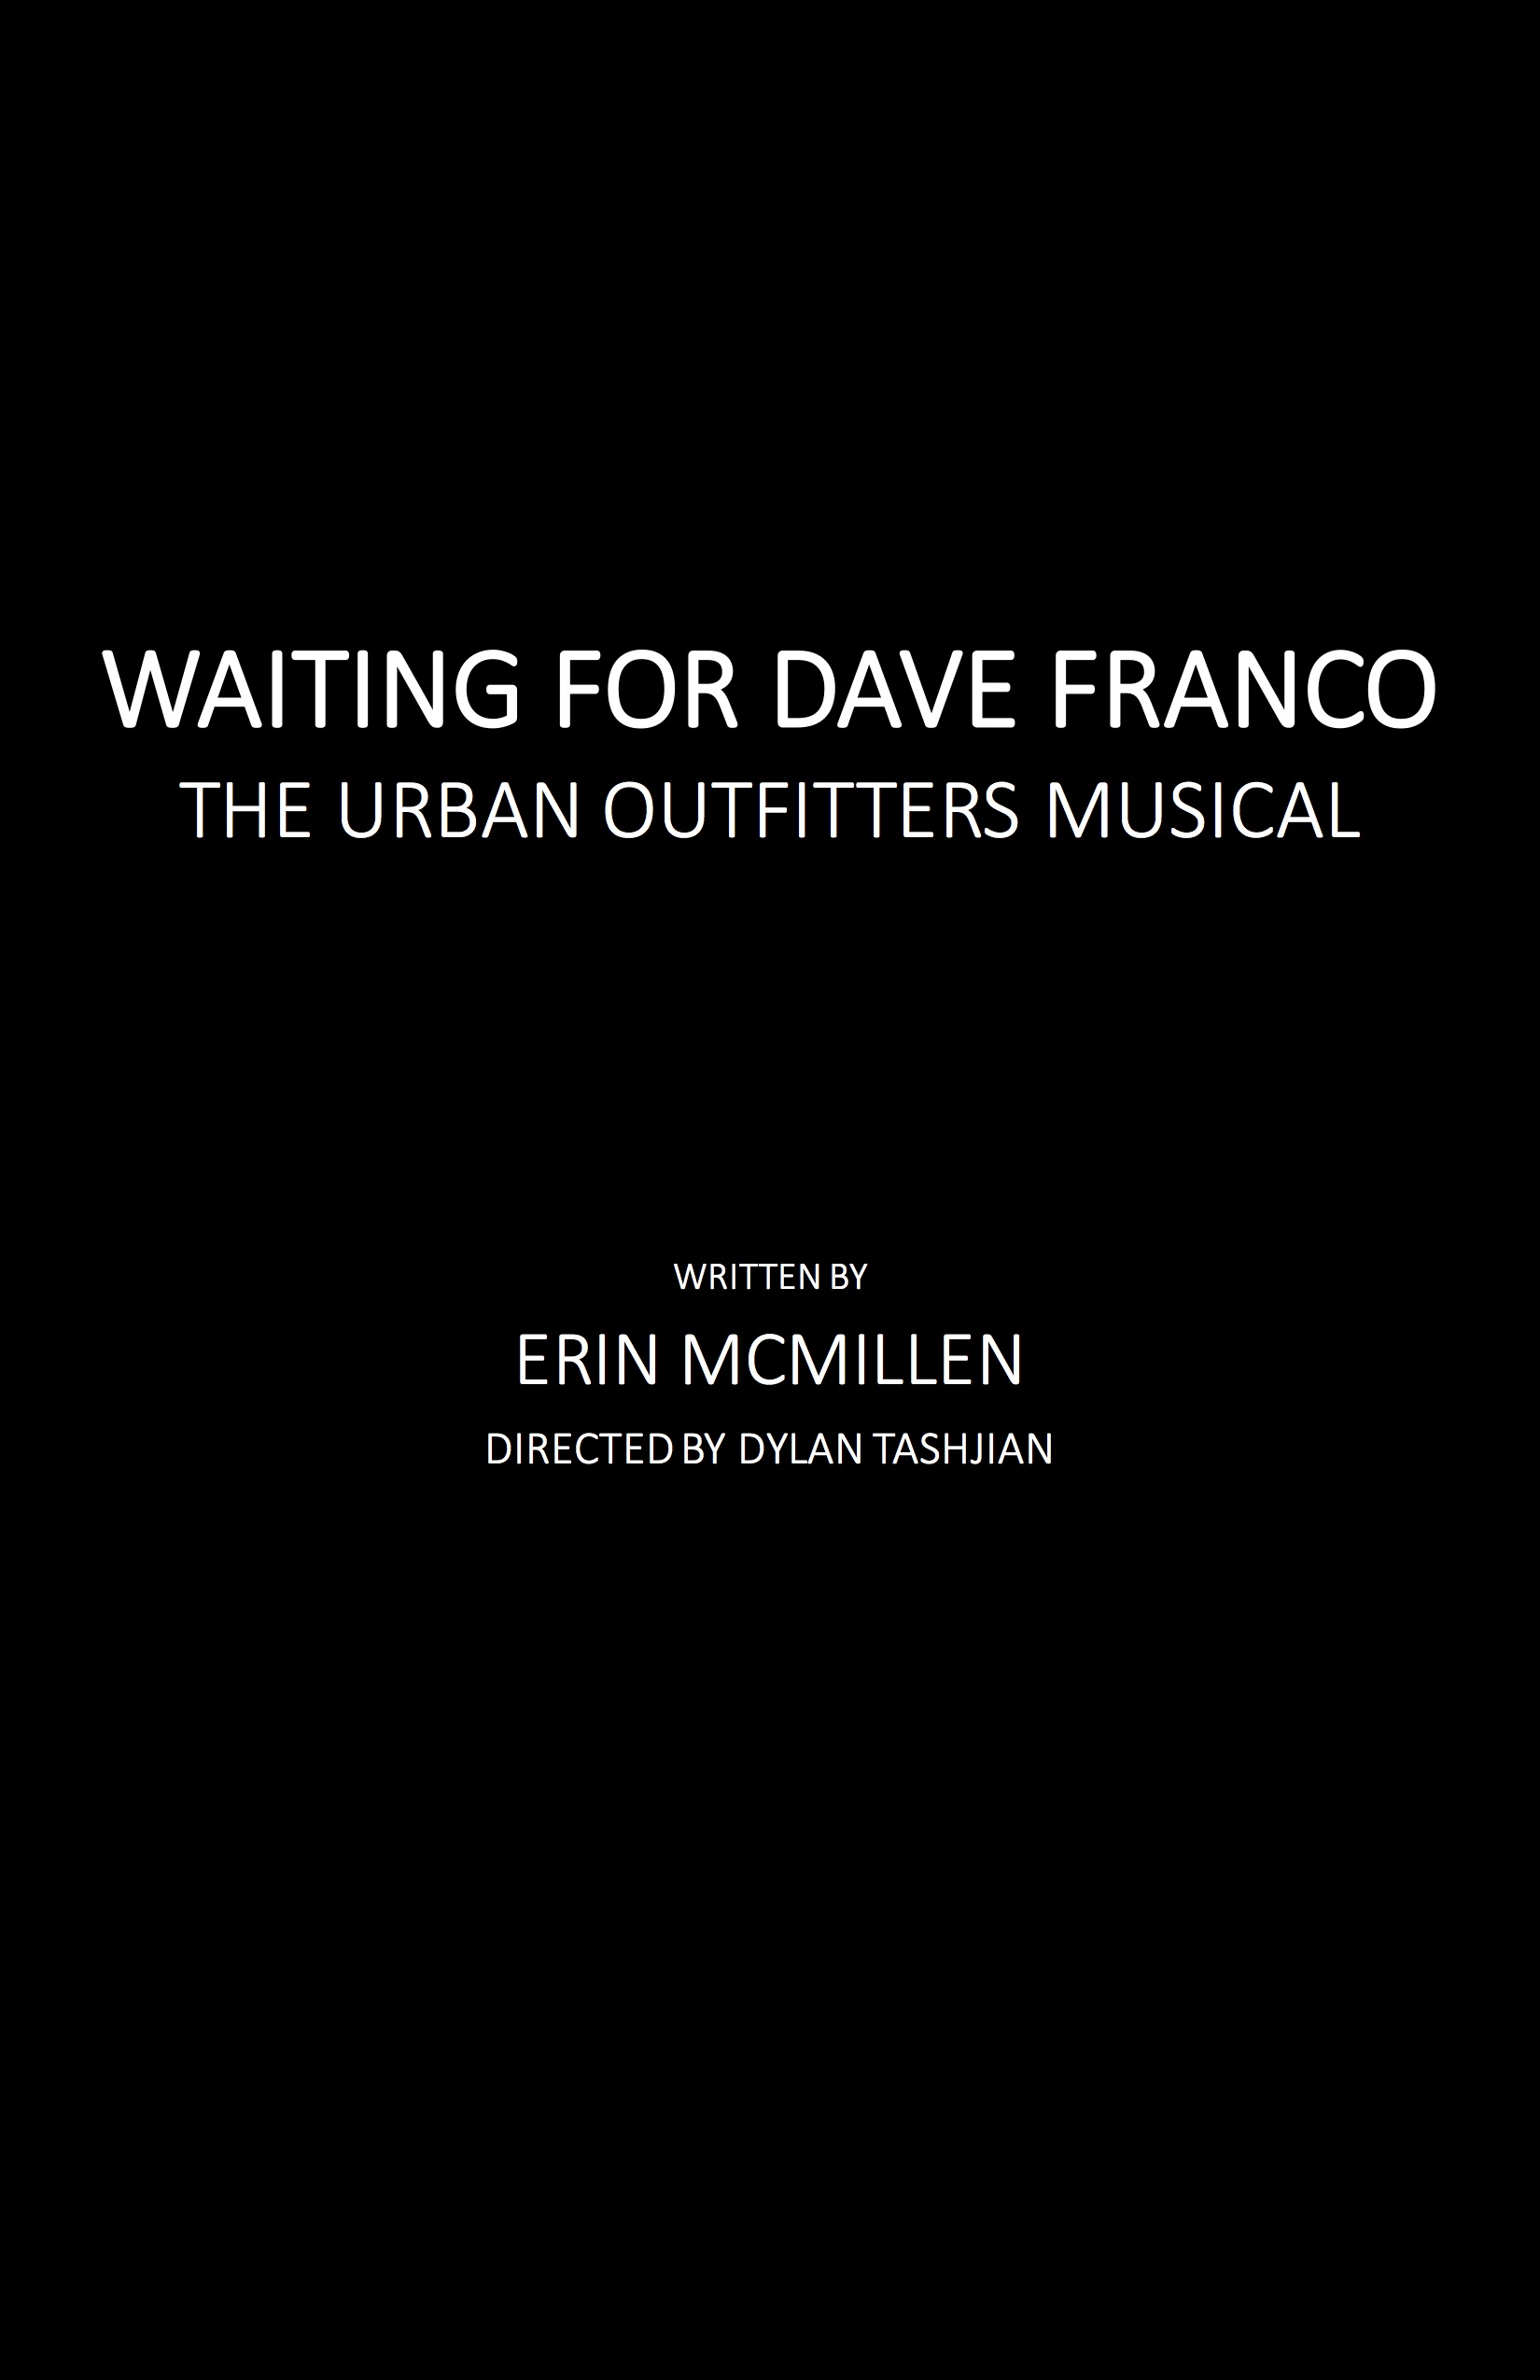 WAITING FOR dave francojpg